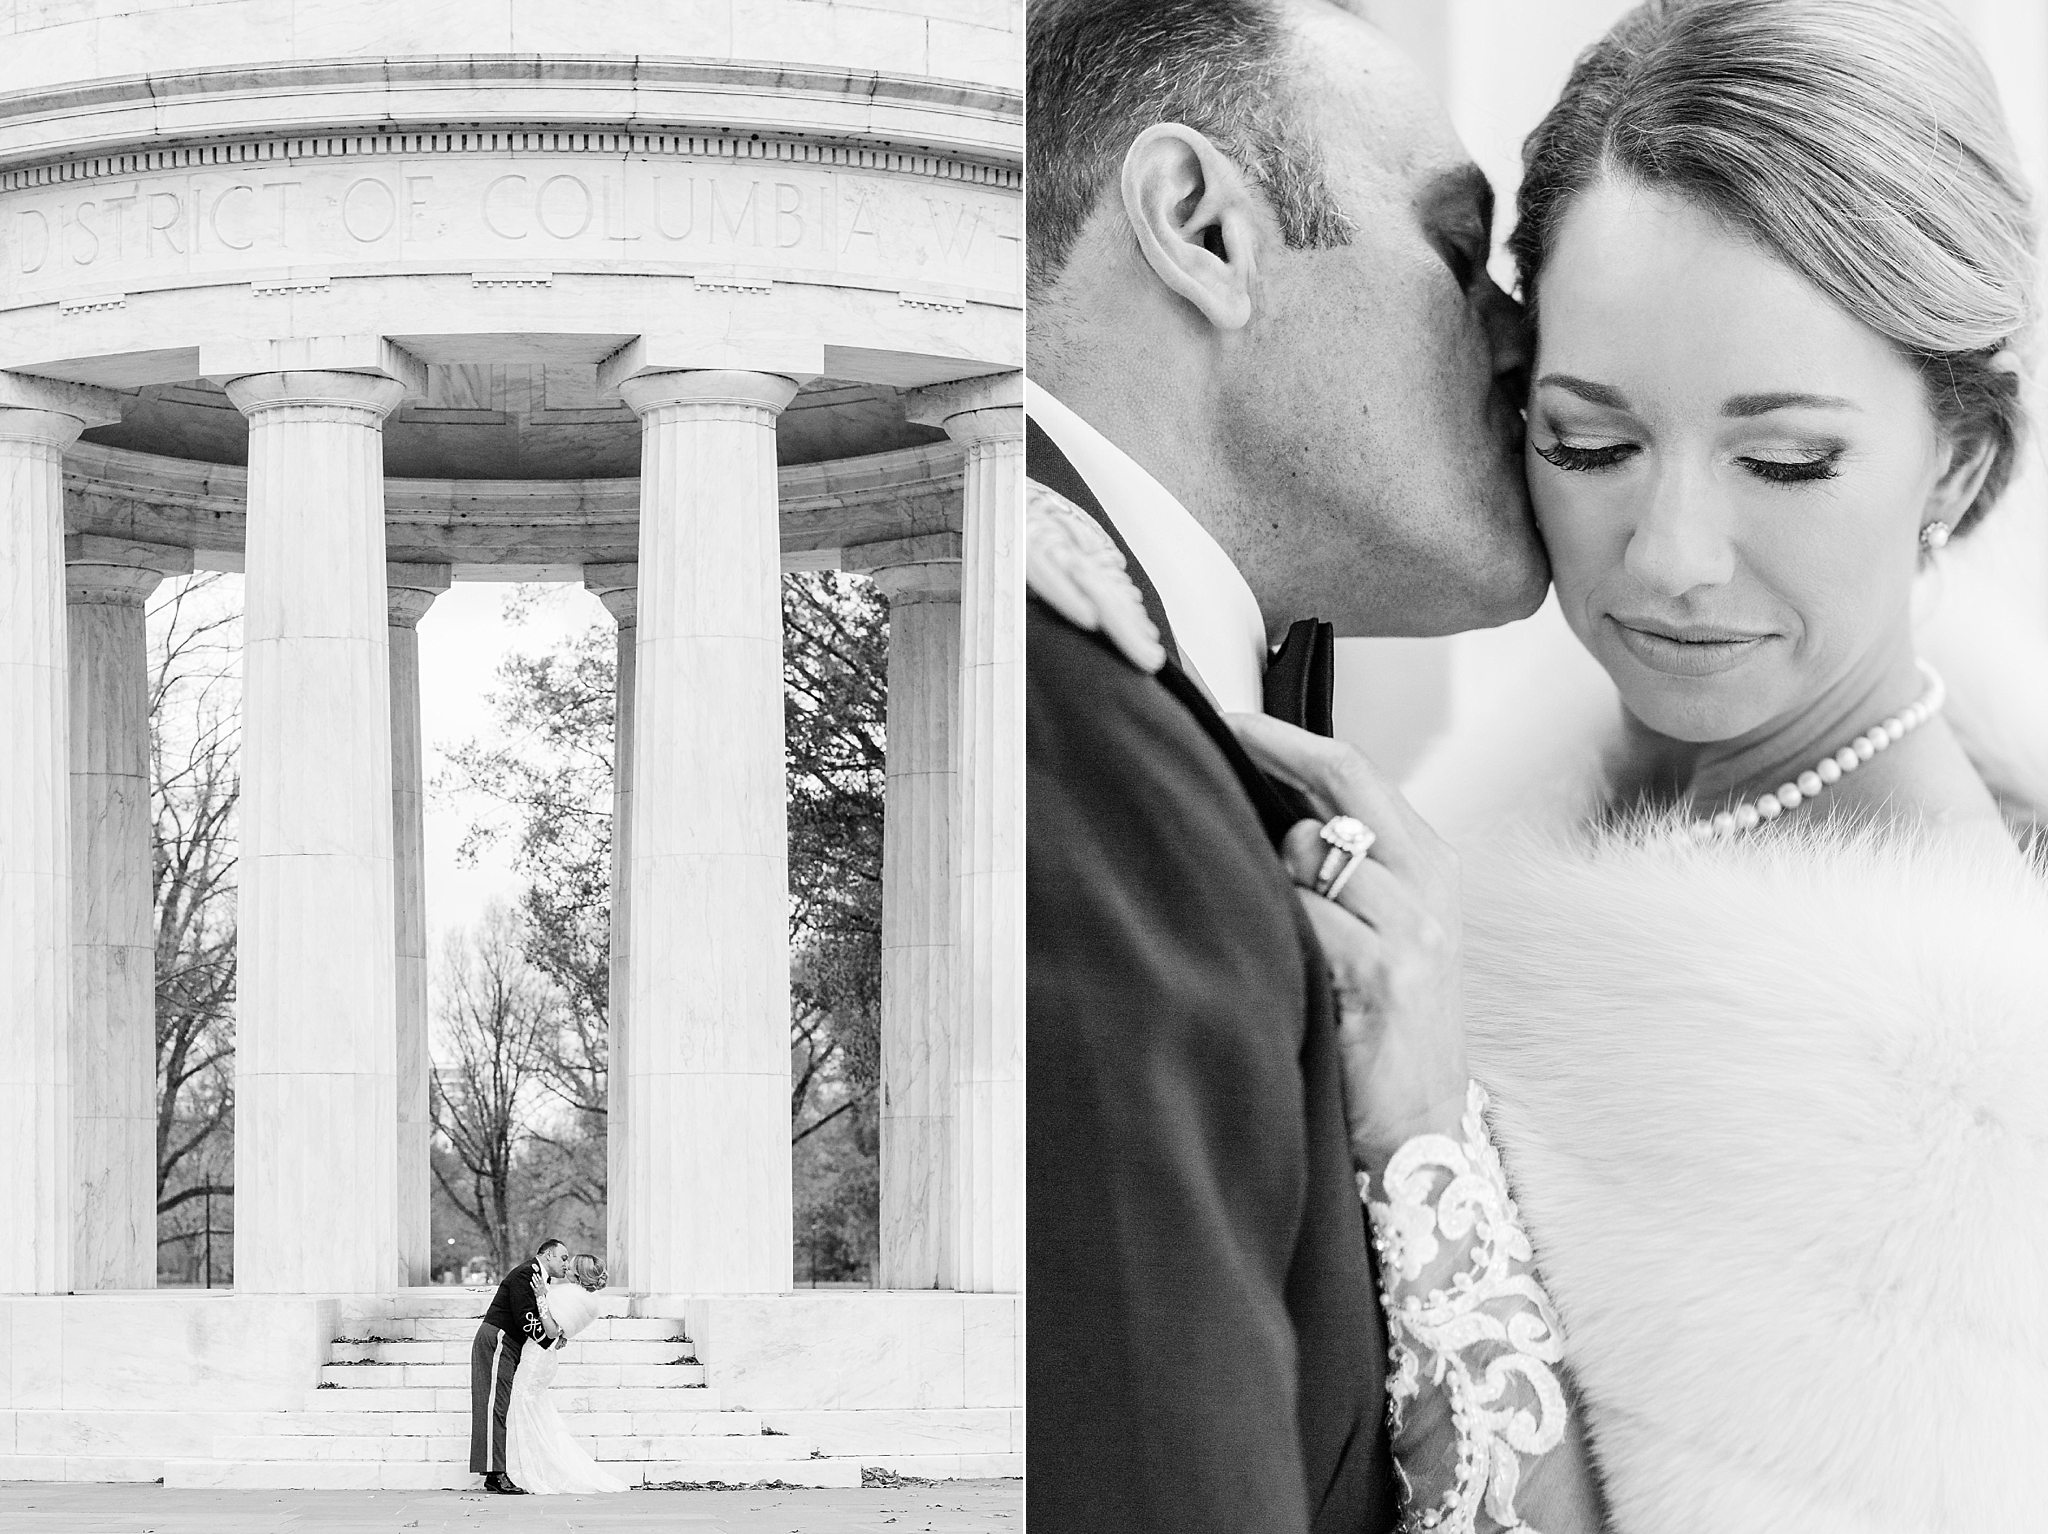 This intimate elopement was held at the DC War Memorial in District of Columbia and was photographed by Washington, DC wedding photographer, Alicia Lacey.